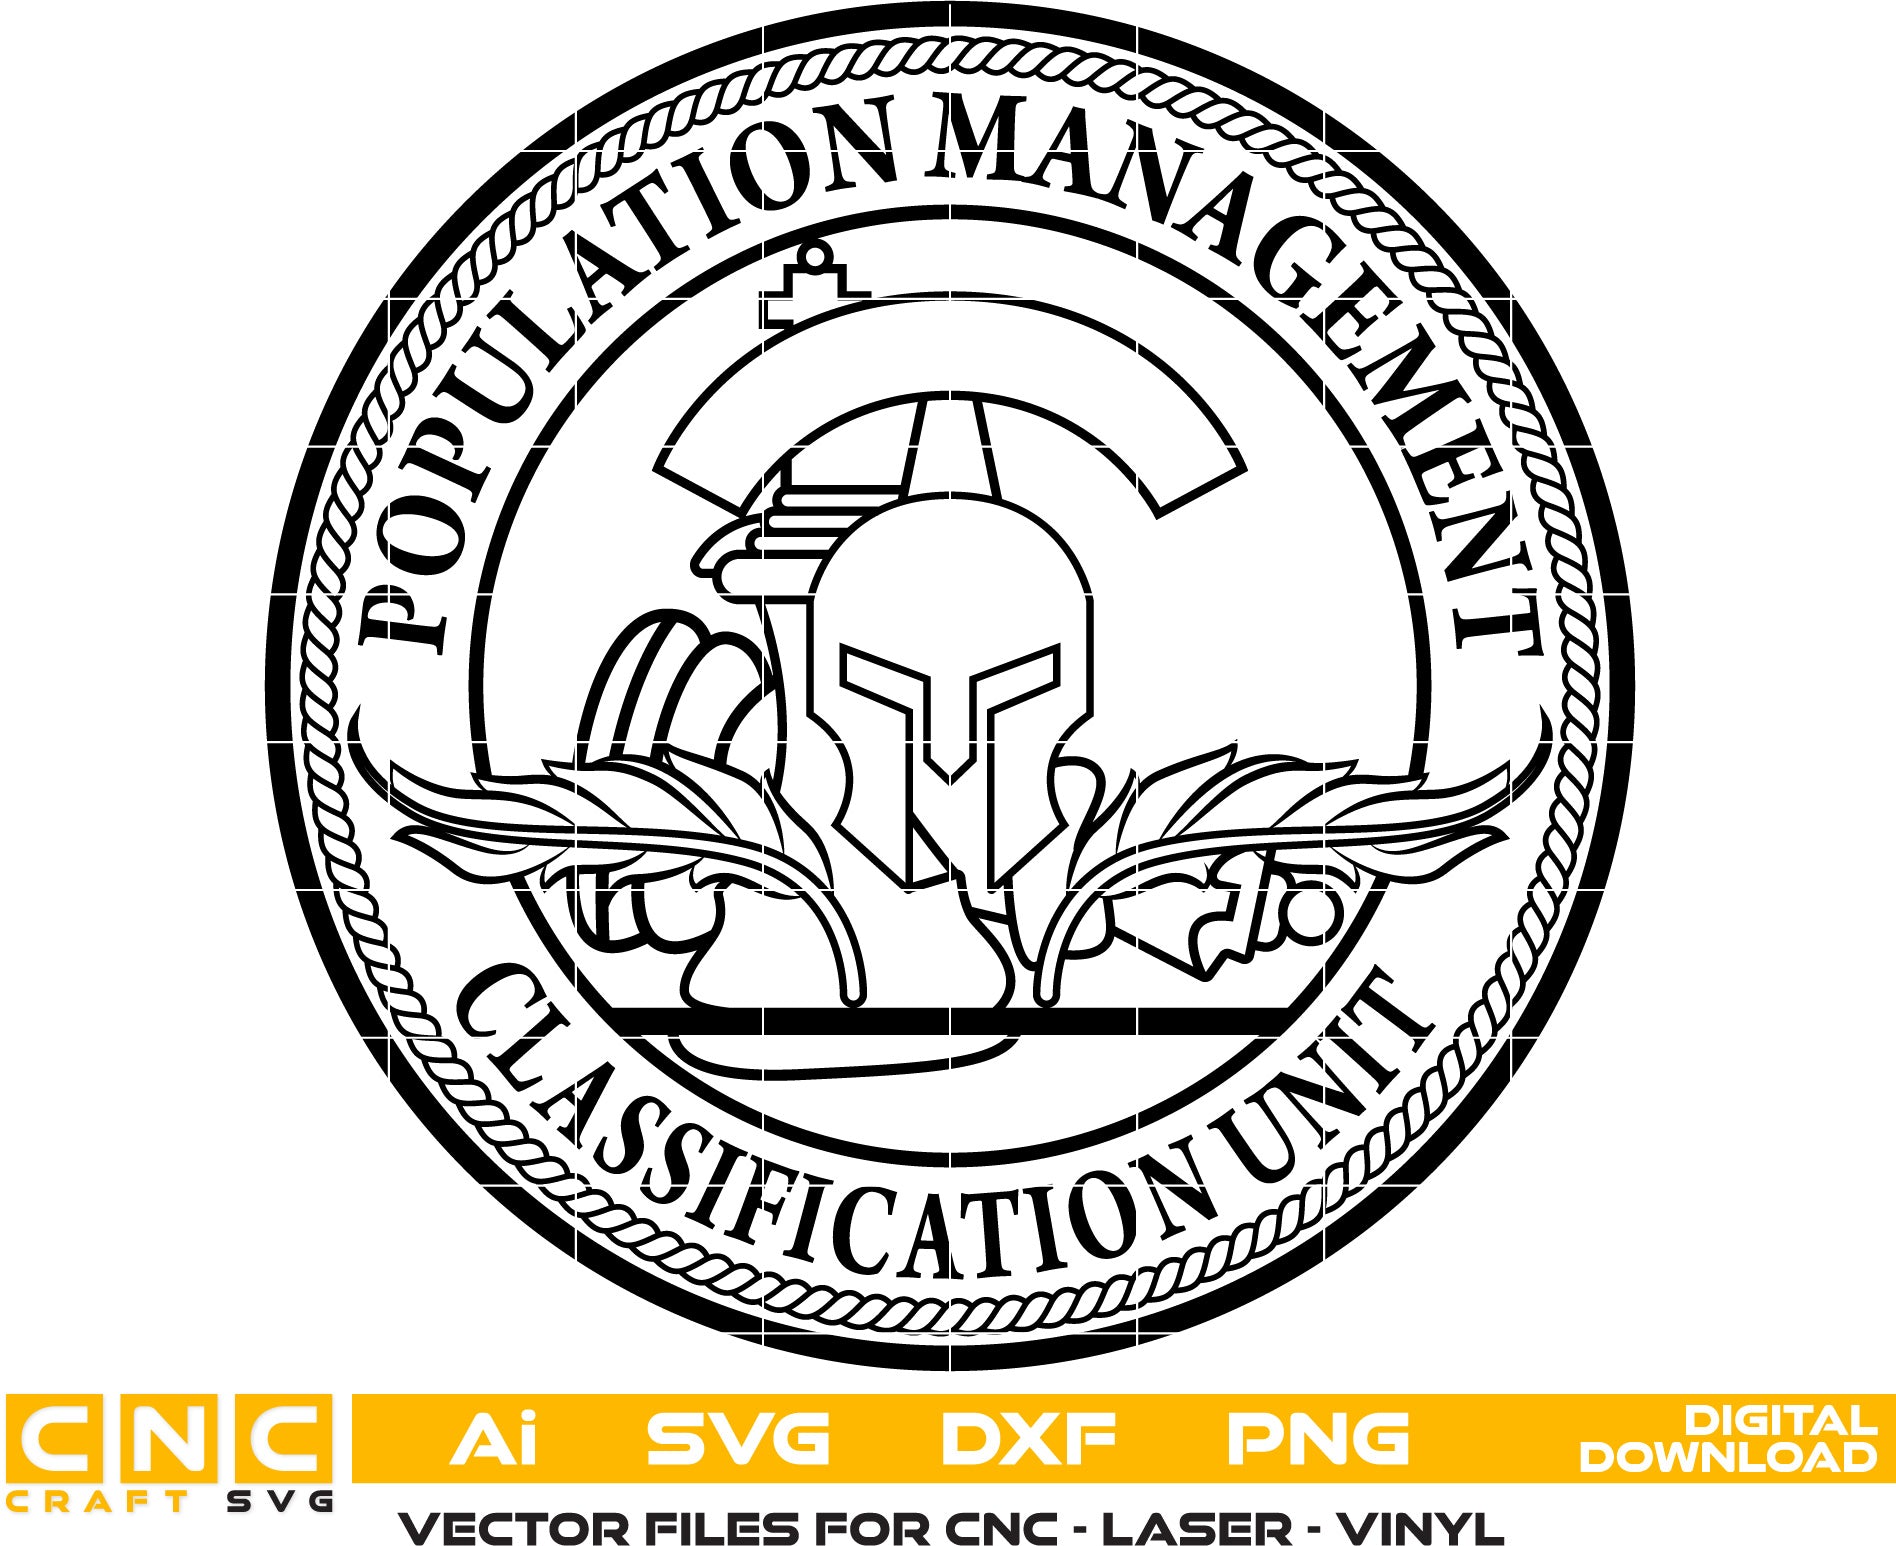 Population Management Classification Unit Logo Vector Art, Ai,SVG, DXF, PNG, Digital Files for Laser Engraving, Woodworking & Printing